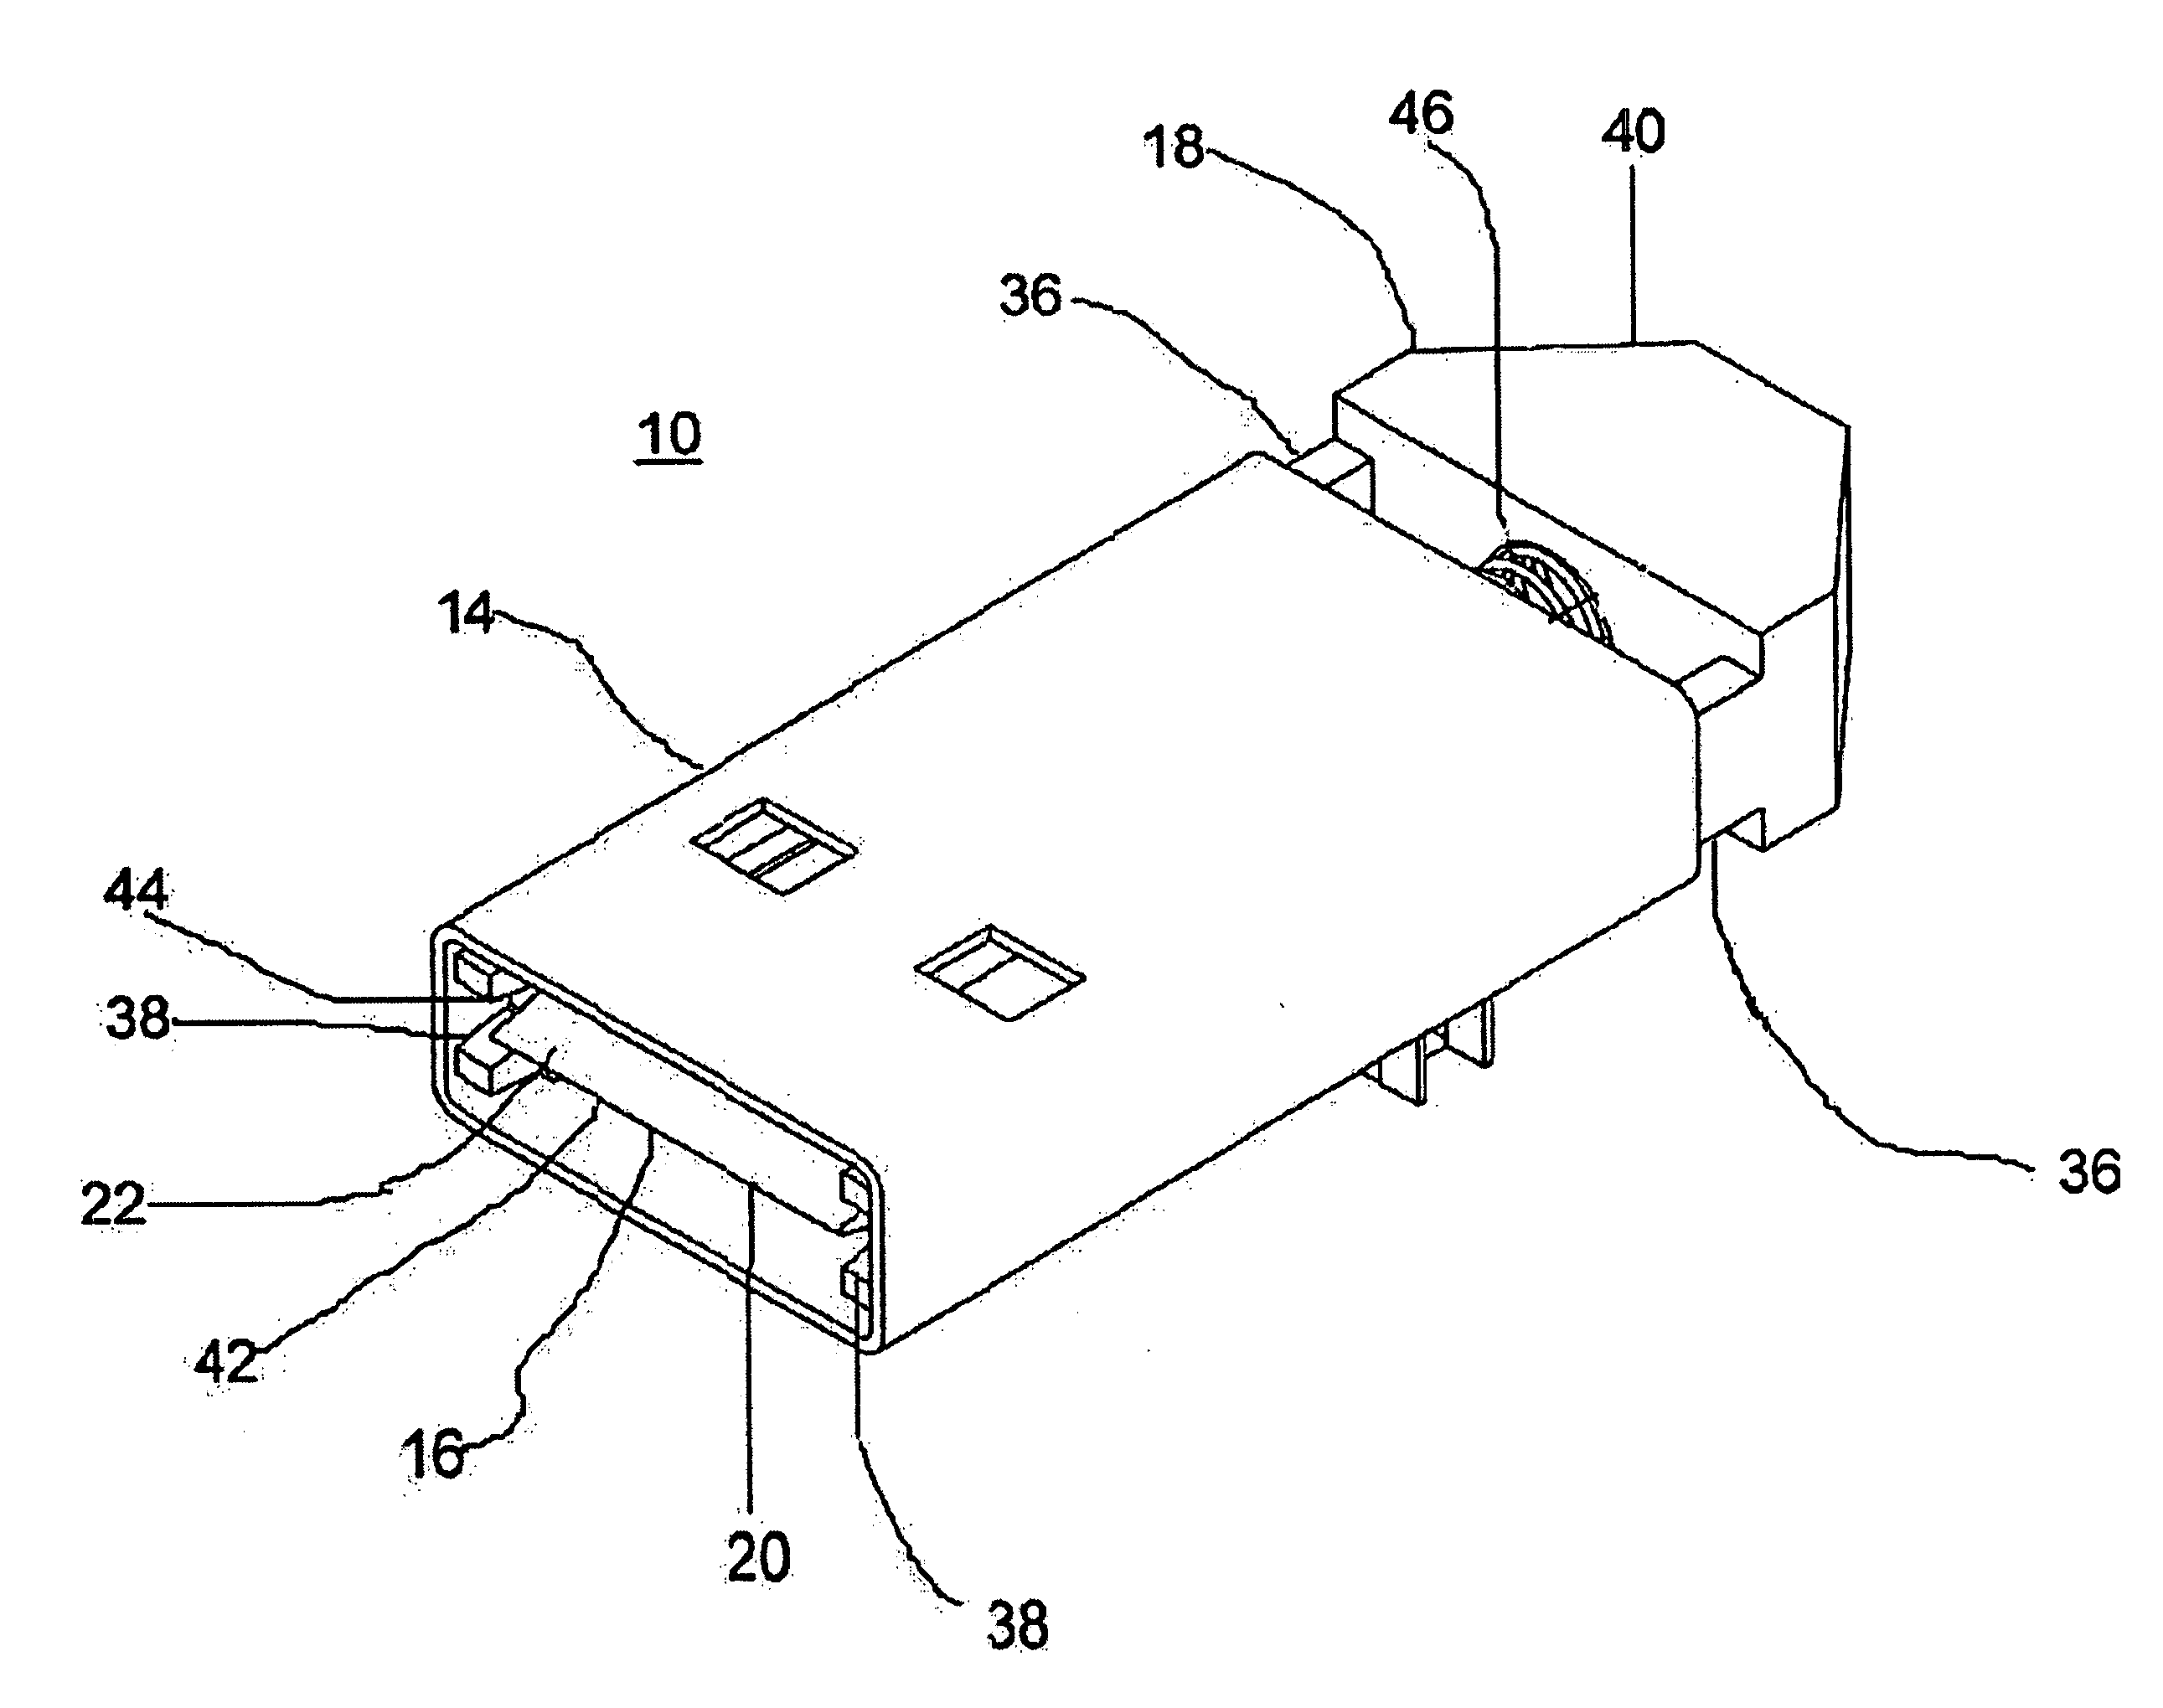 Reversible universal serial bus (USB) device and connector